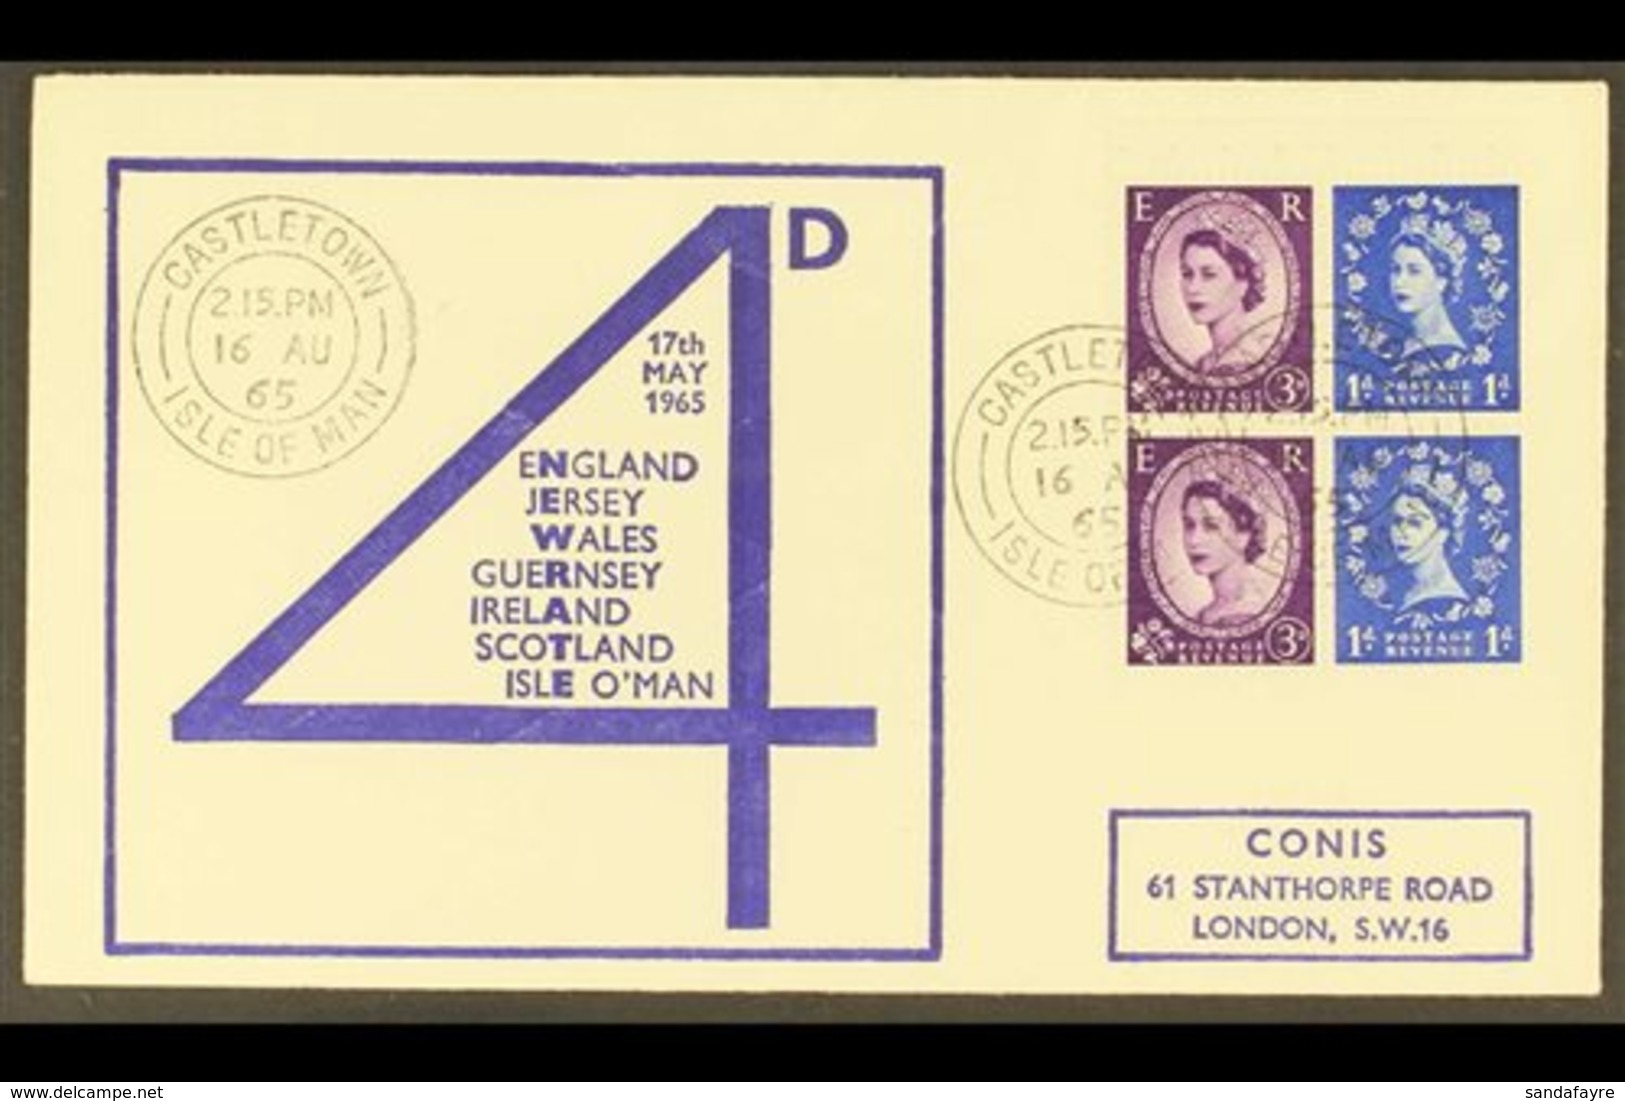 1965 (16th August) Wilding Definitive 3d X 2 Plus 1d X 2 Se-tenant Booklet Pane Display FDC, Castletown (Isle Of Man) Cd - FDC